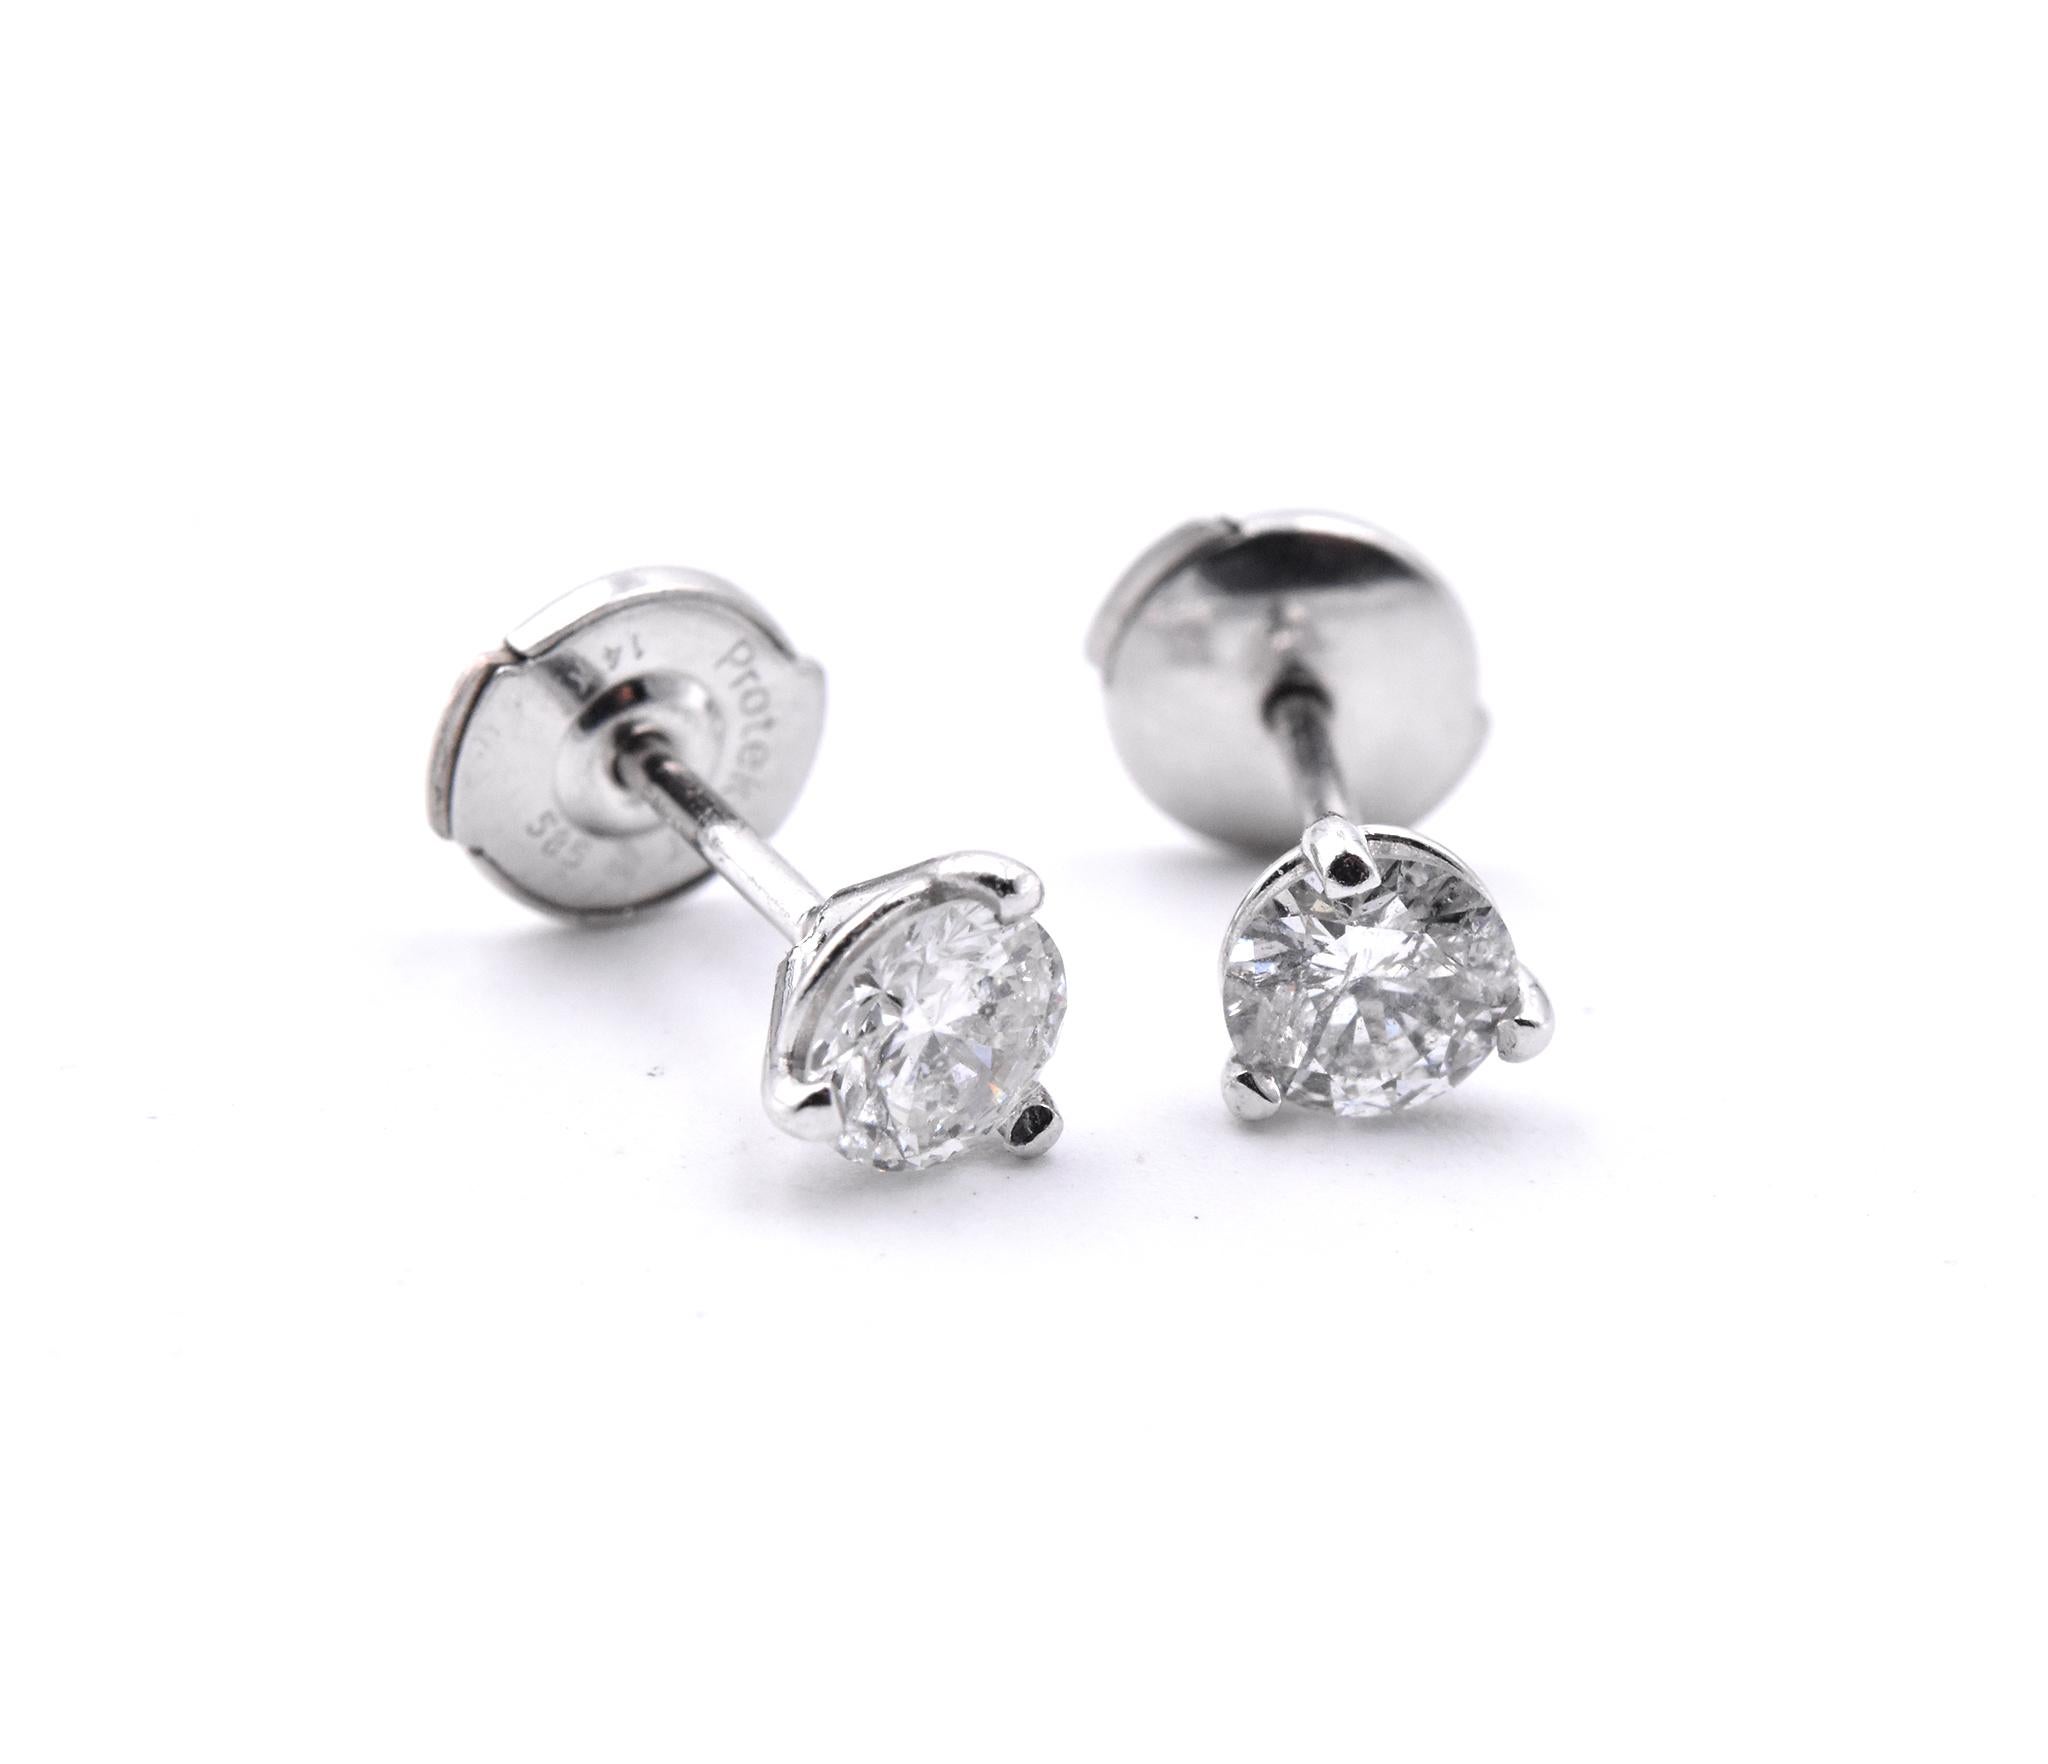 Material: 14K white gold
Diamonds: 2 round brilliant cuts=.64cttw 
Color: H
Clarity: SI2
Dimensions: earrings measure 5.00mm in outer diameter
Fastenings: posts and locking backs 
Weight: 1.03 grams
